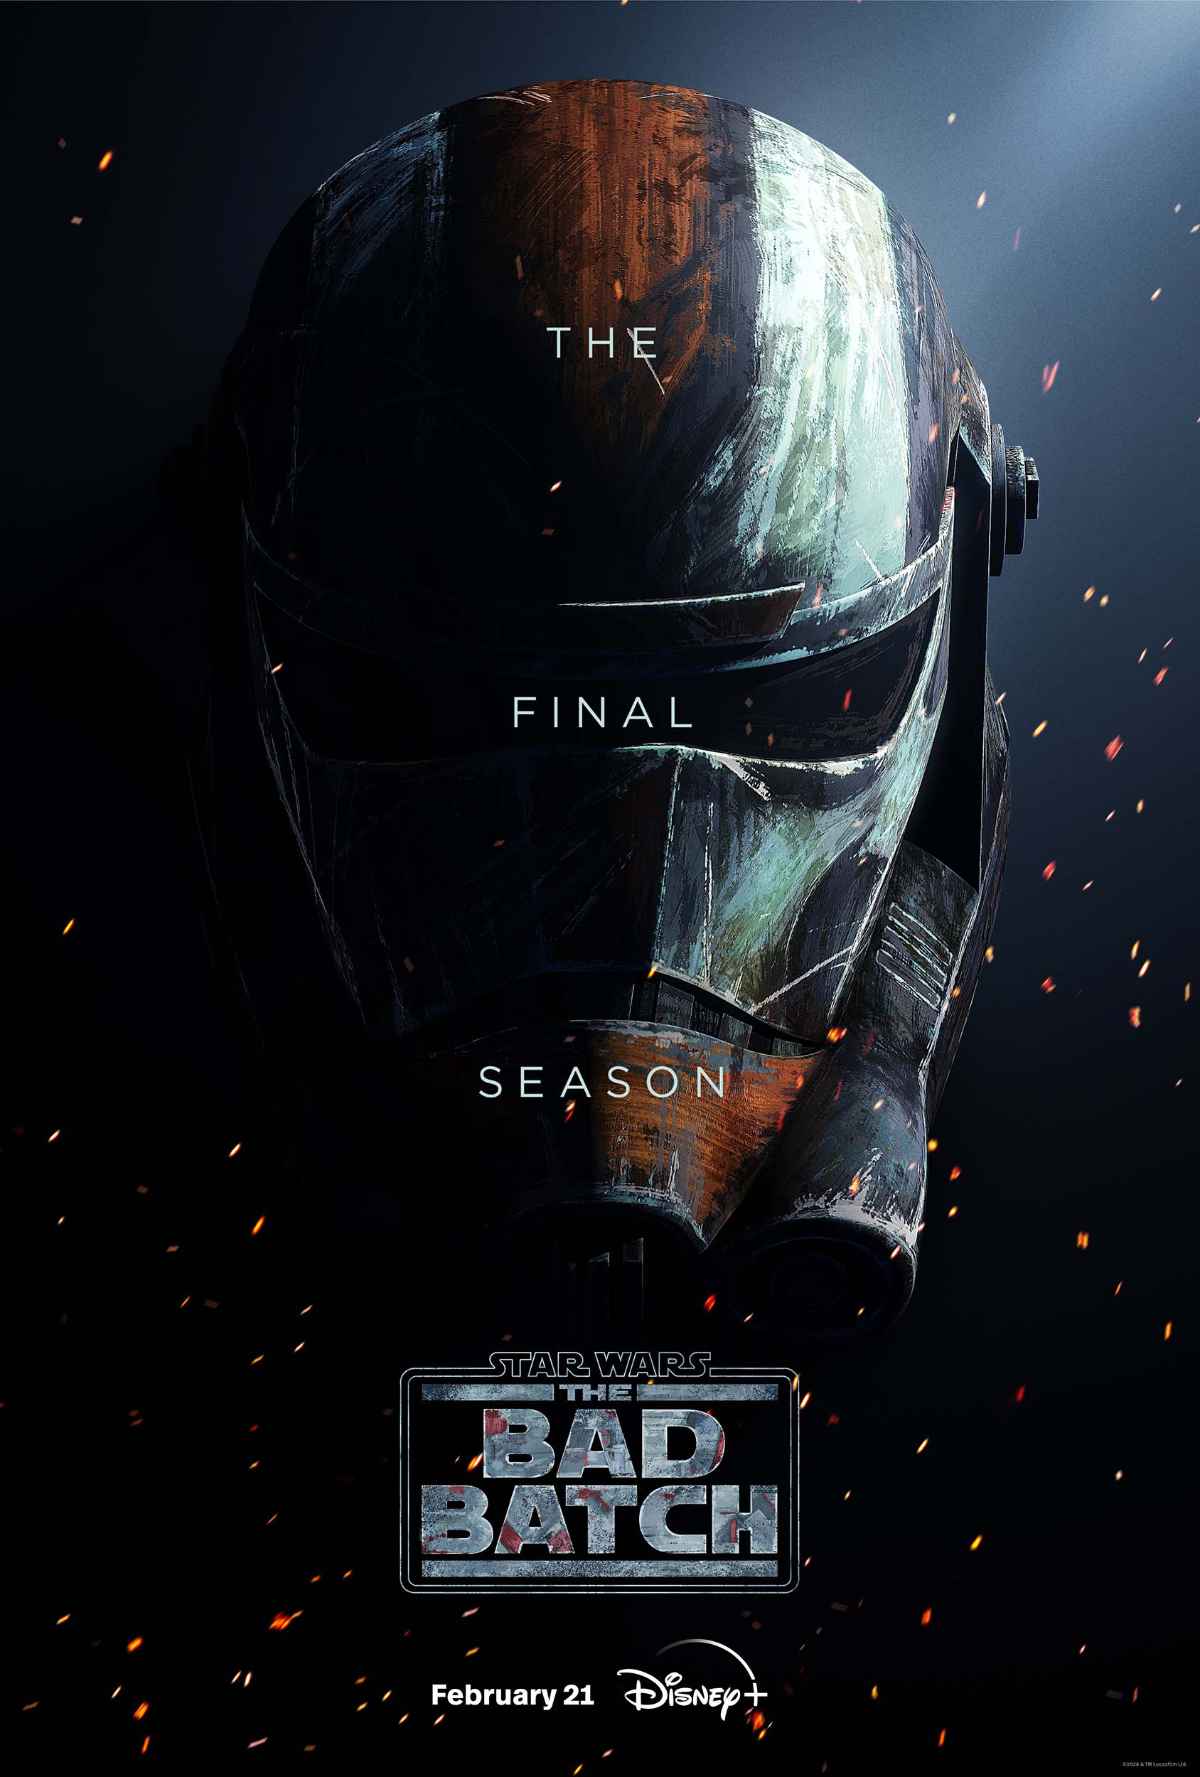 Star Wars: The Bad Batch Final Season Trailer and Poster